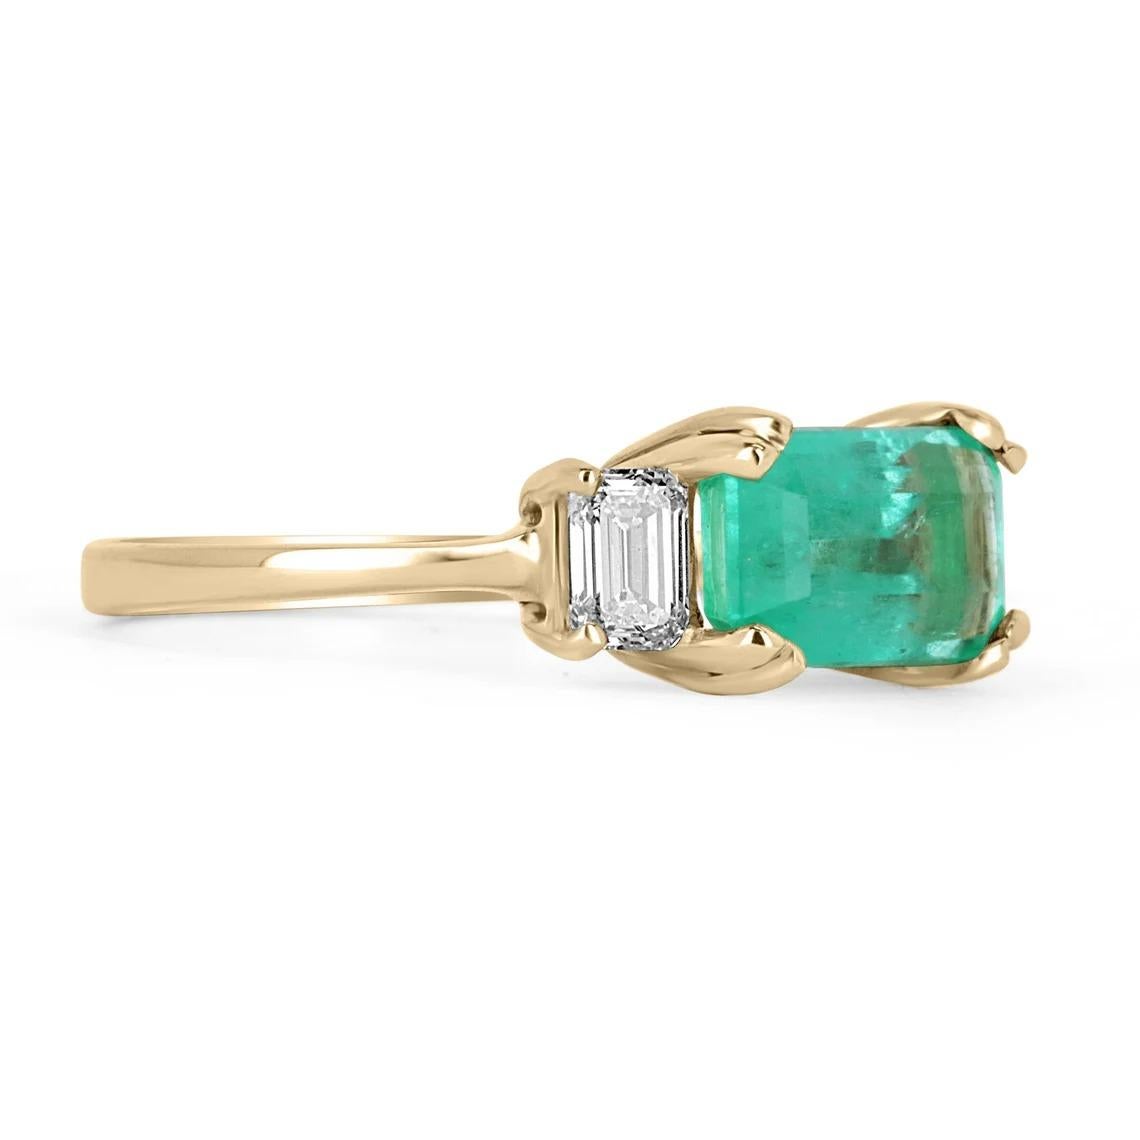 Featured is a magnificent, Colombian emerald and diamond ring. In the very center is a gorgeous, 2.71-carat elongated Colombian emerald-emerald cut, set east to west and displays a stunning, vivid green color, and excellent luster. Accented on the